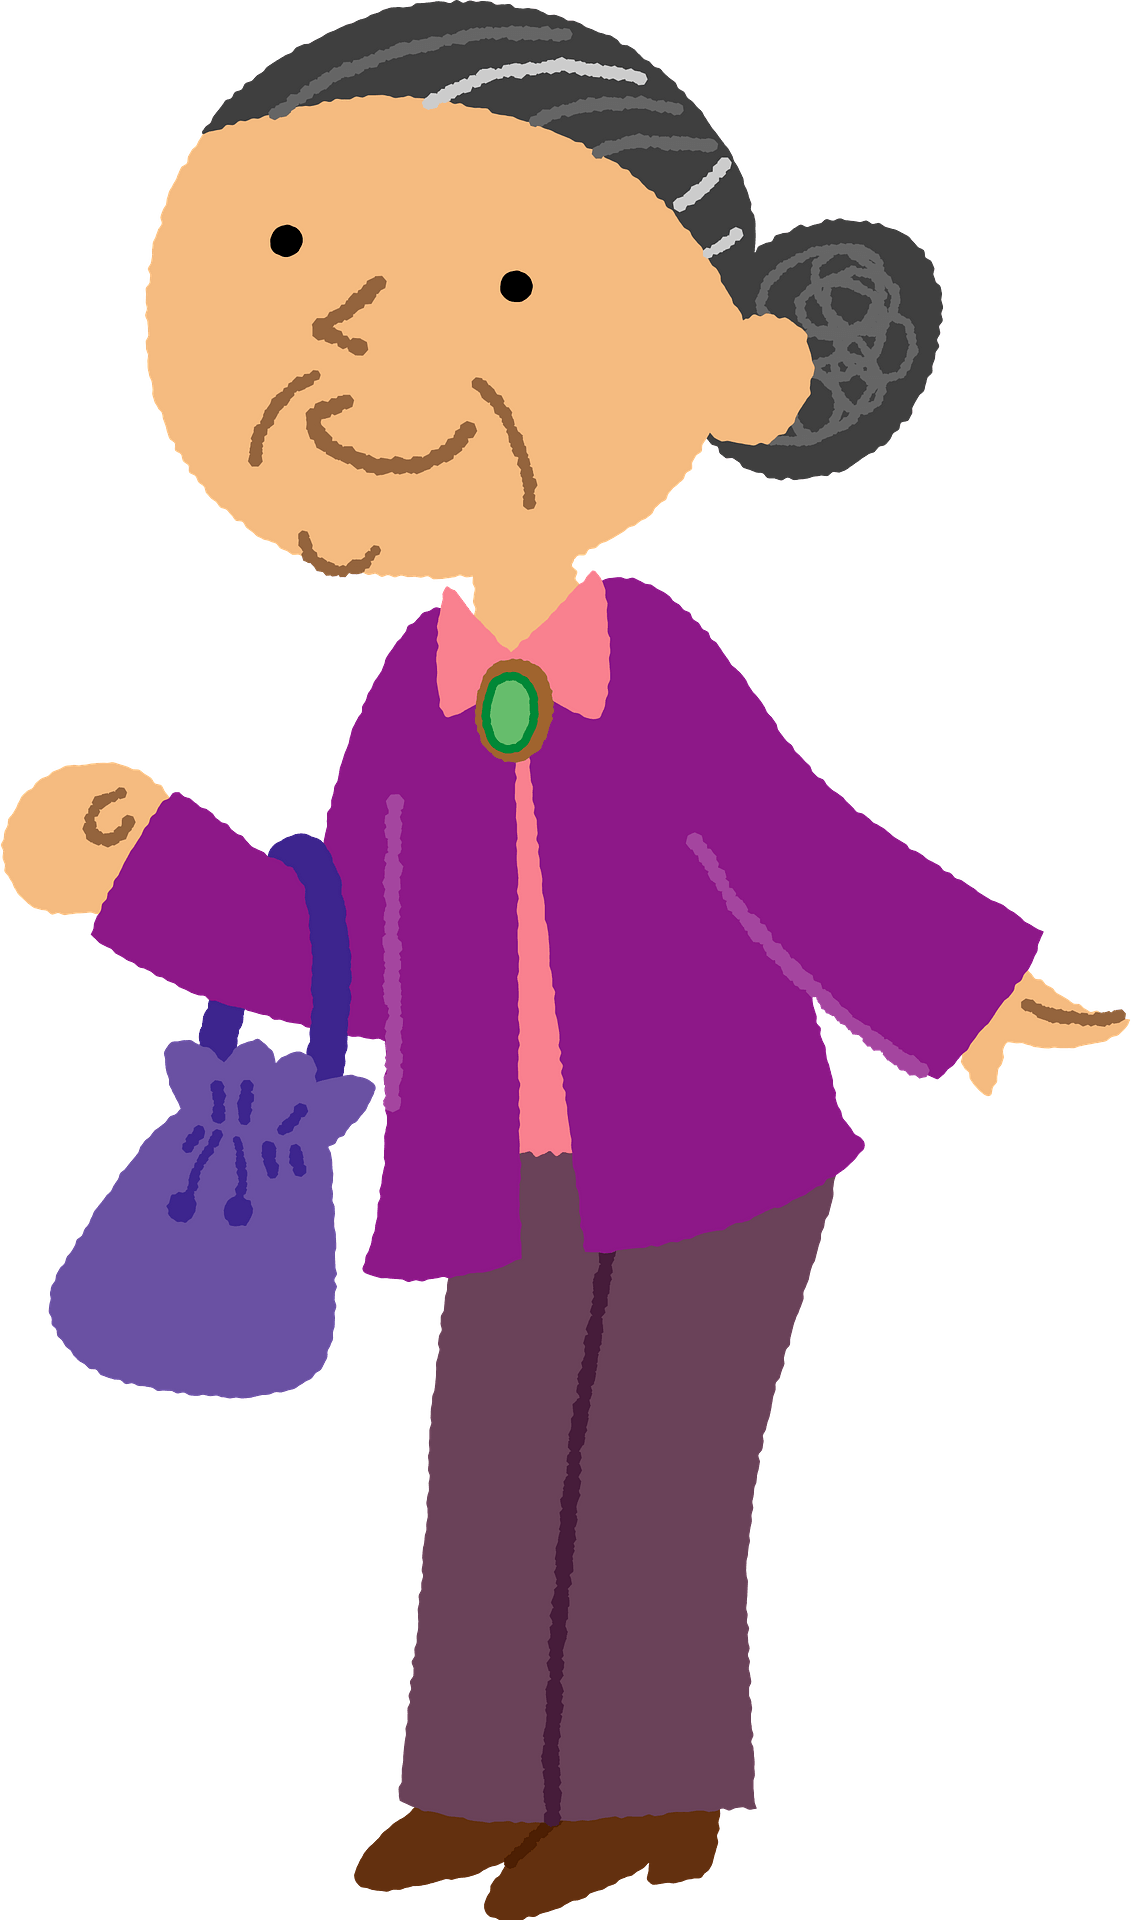 610 Older Women Empowerment Illustrations Royalty Free Vector Clip Art Library